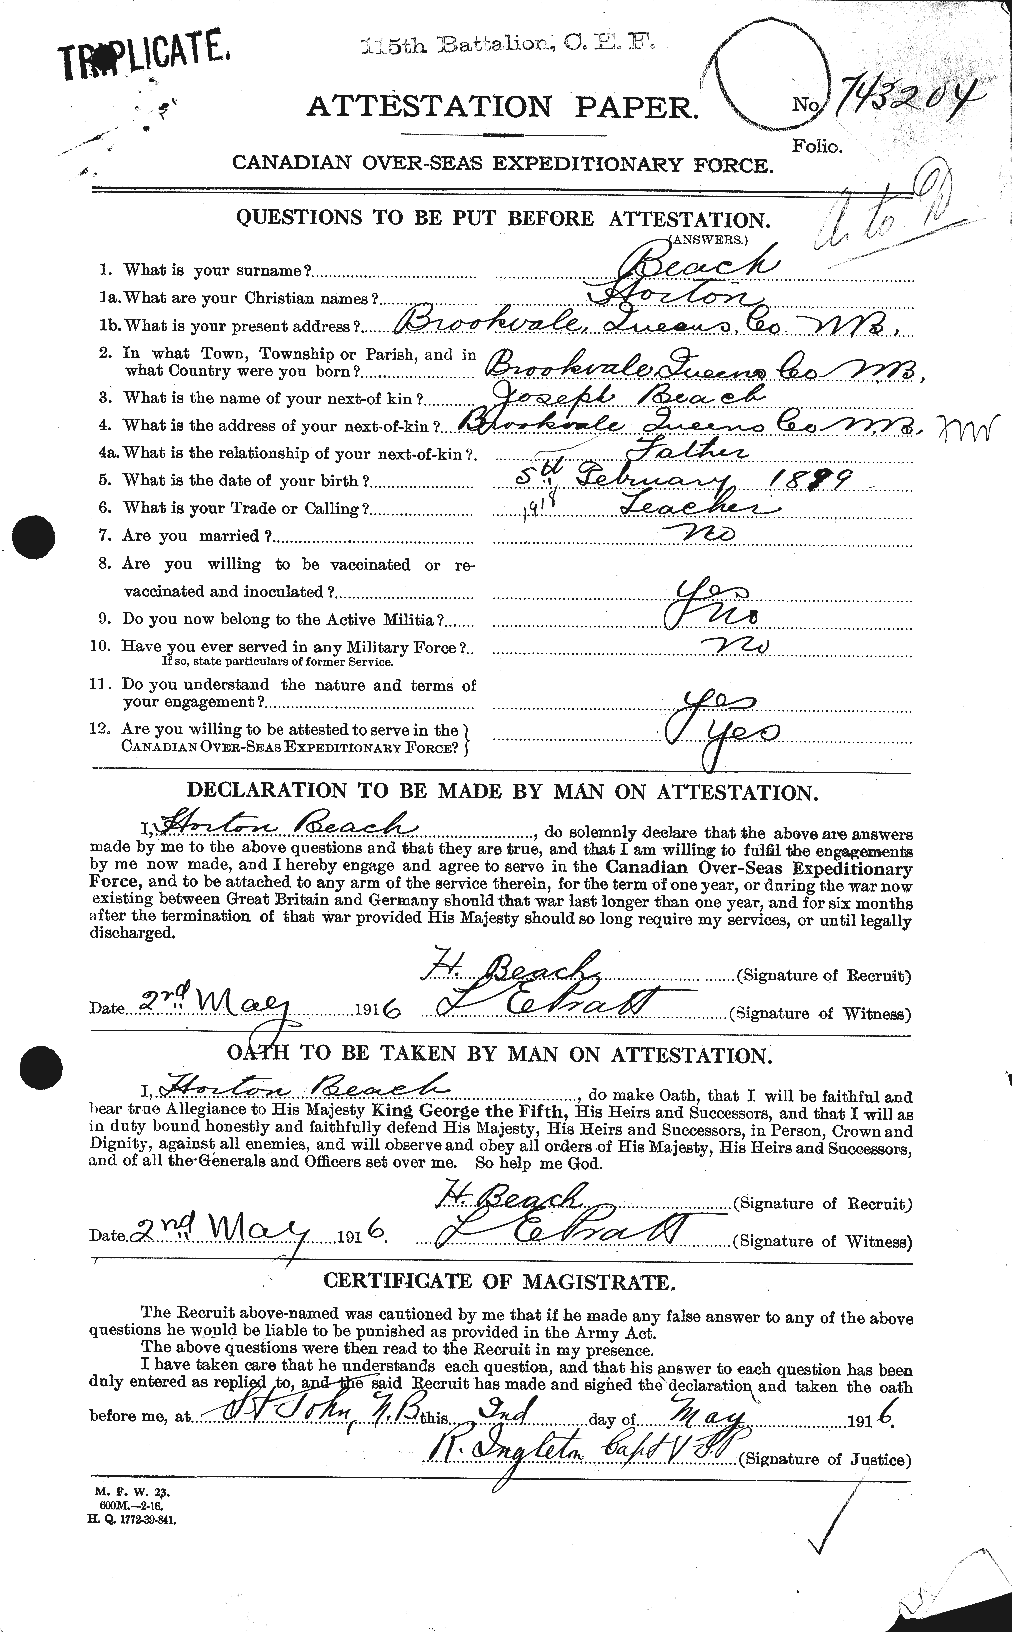 Personnel Records of the First World War - CEF 235111a